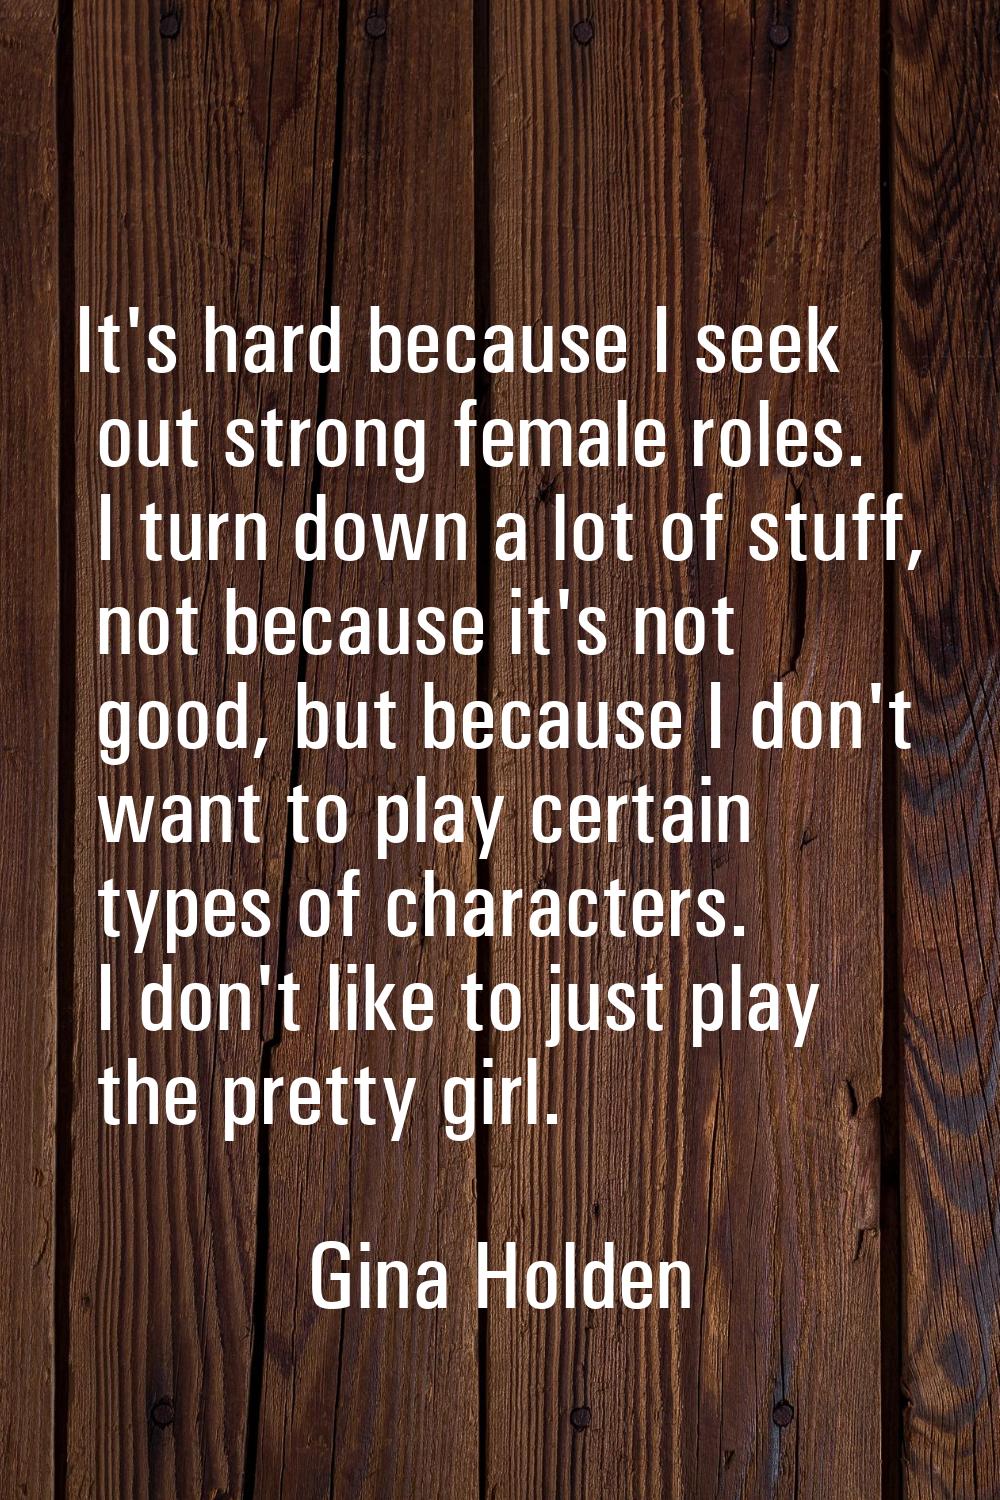 It's hard because I seek out strong female roles. I turn down a lot of stuff, not because it's not 